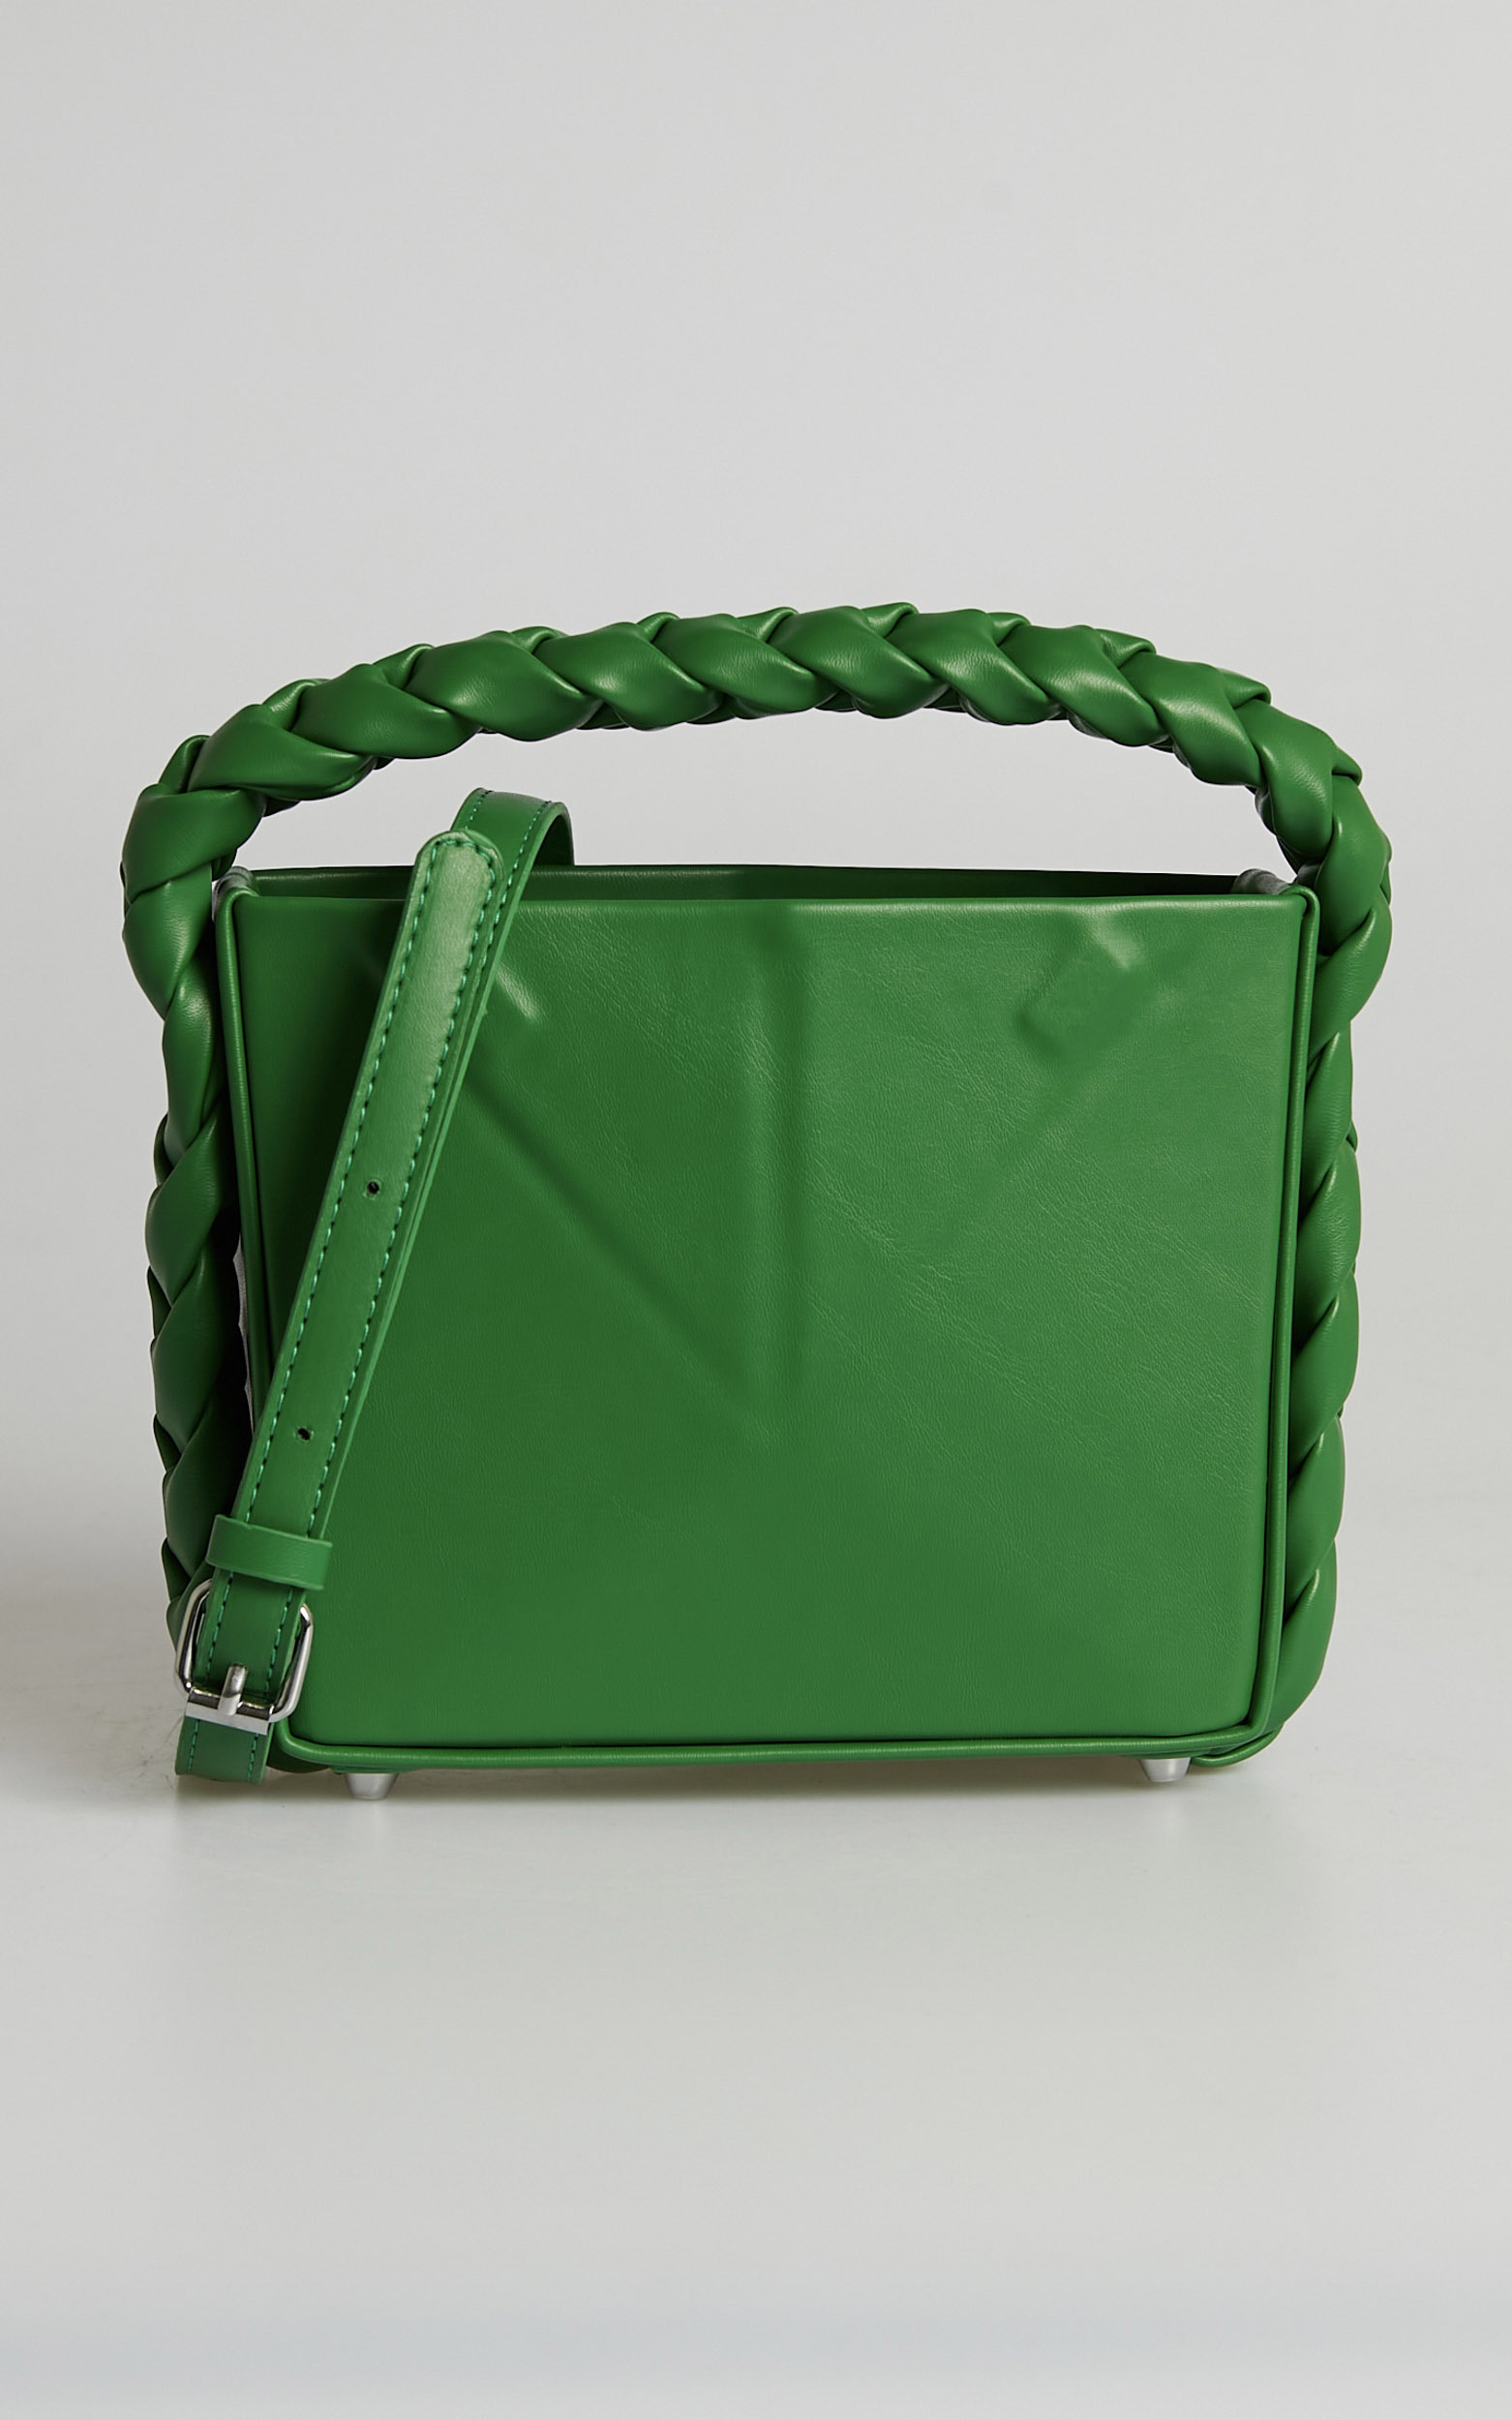 Jopai Bag in Green - NoSize, GRN1, hi-res image number null